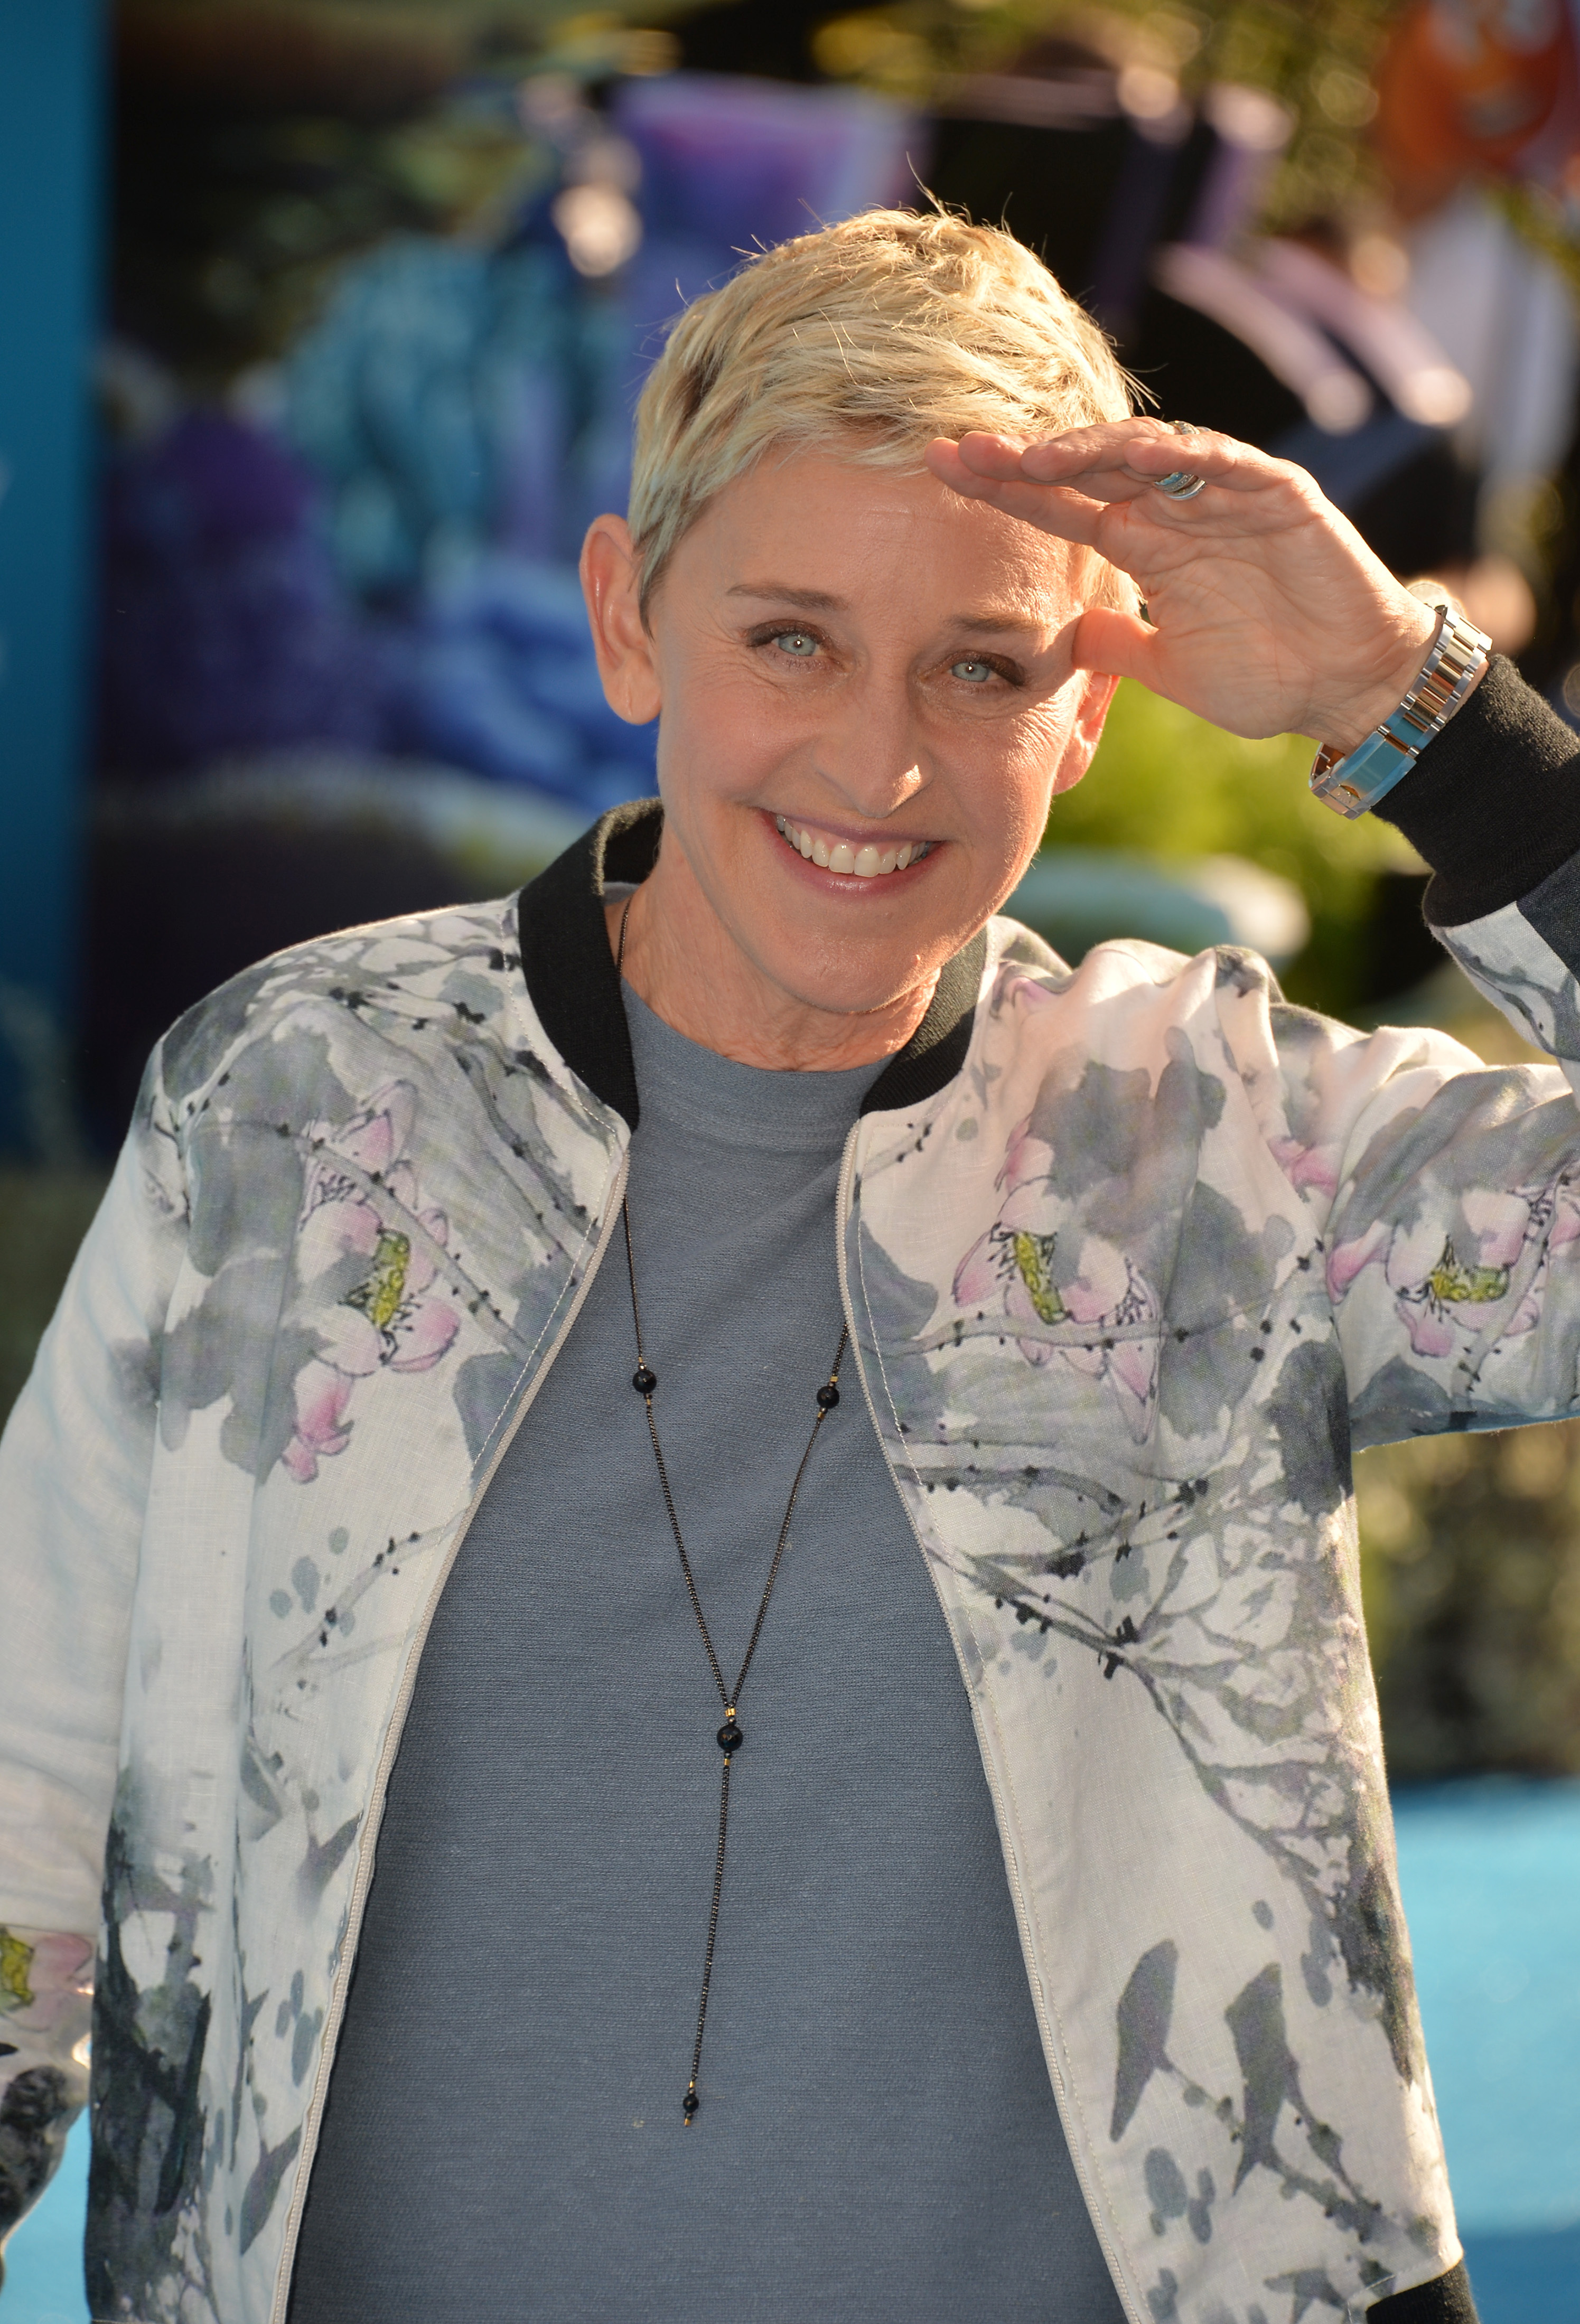 An up-close photo of Ellen DeGeneres in a patterned white jacket and gray inner shirt, with a cute smile on her face.